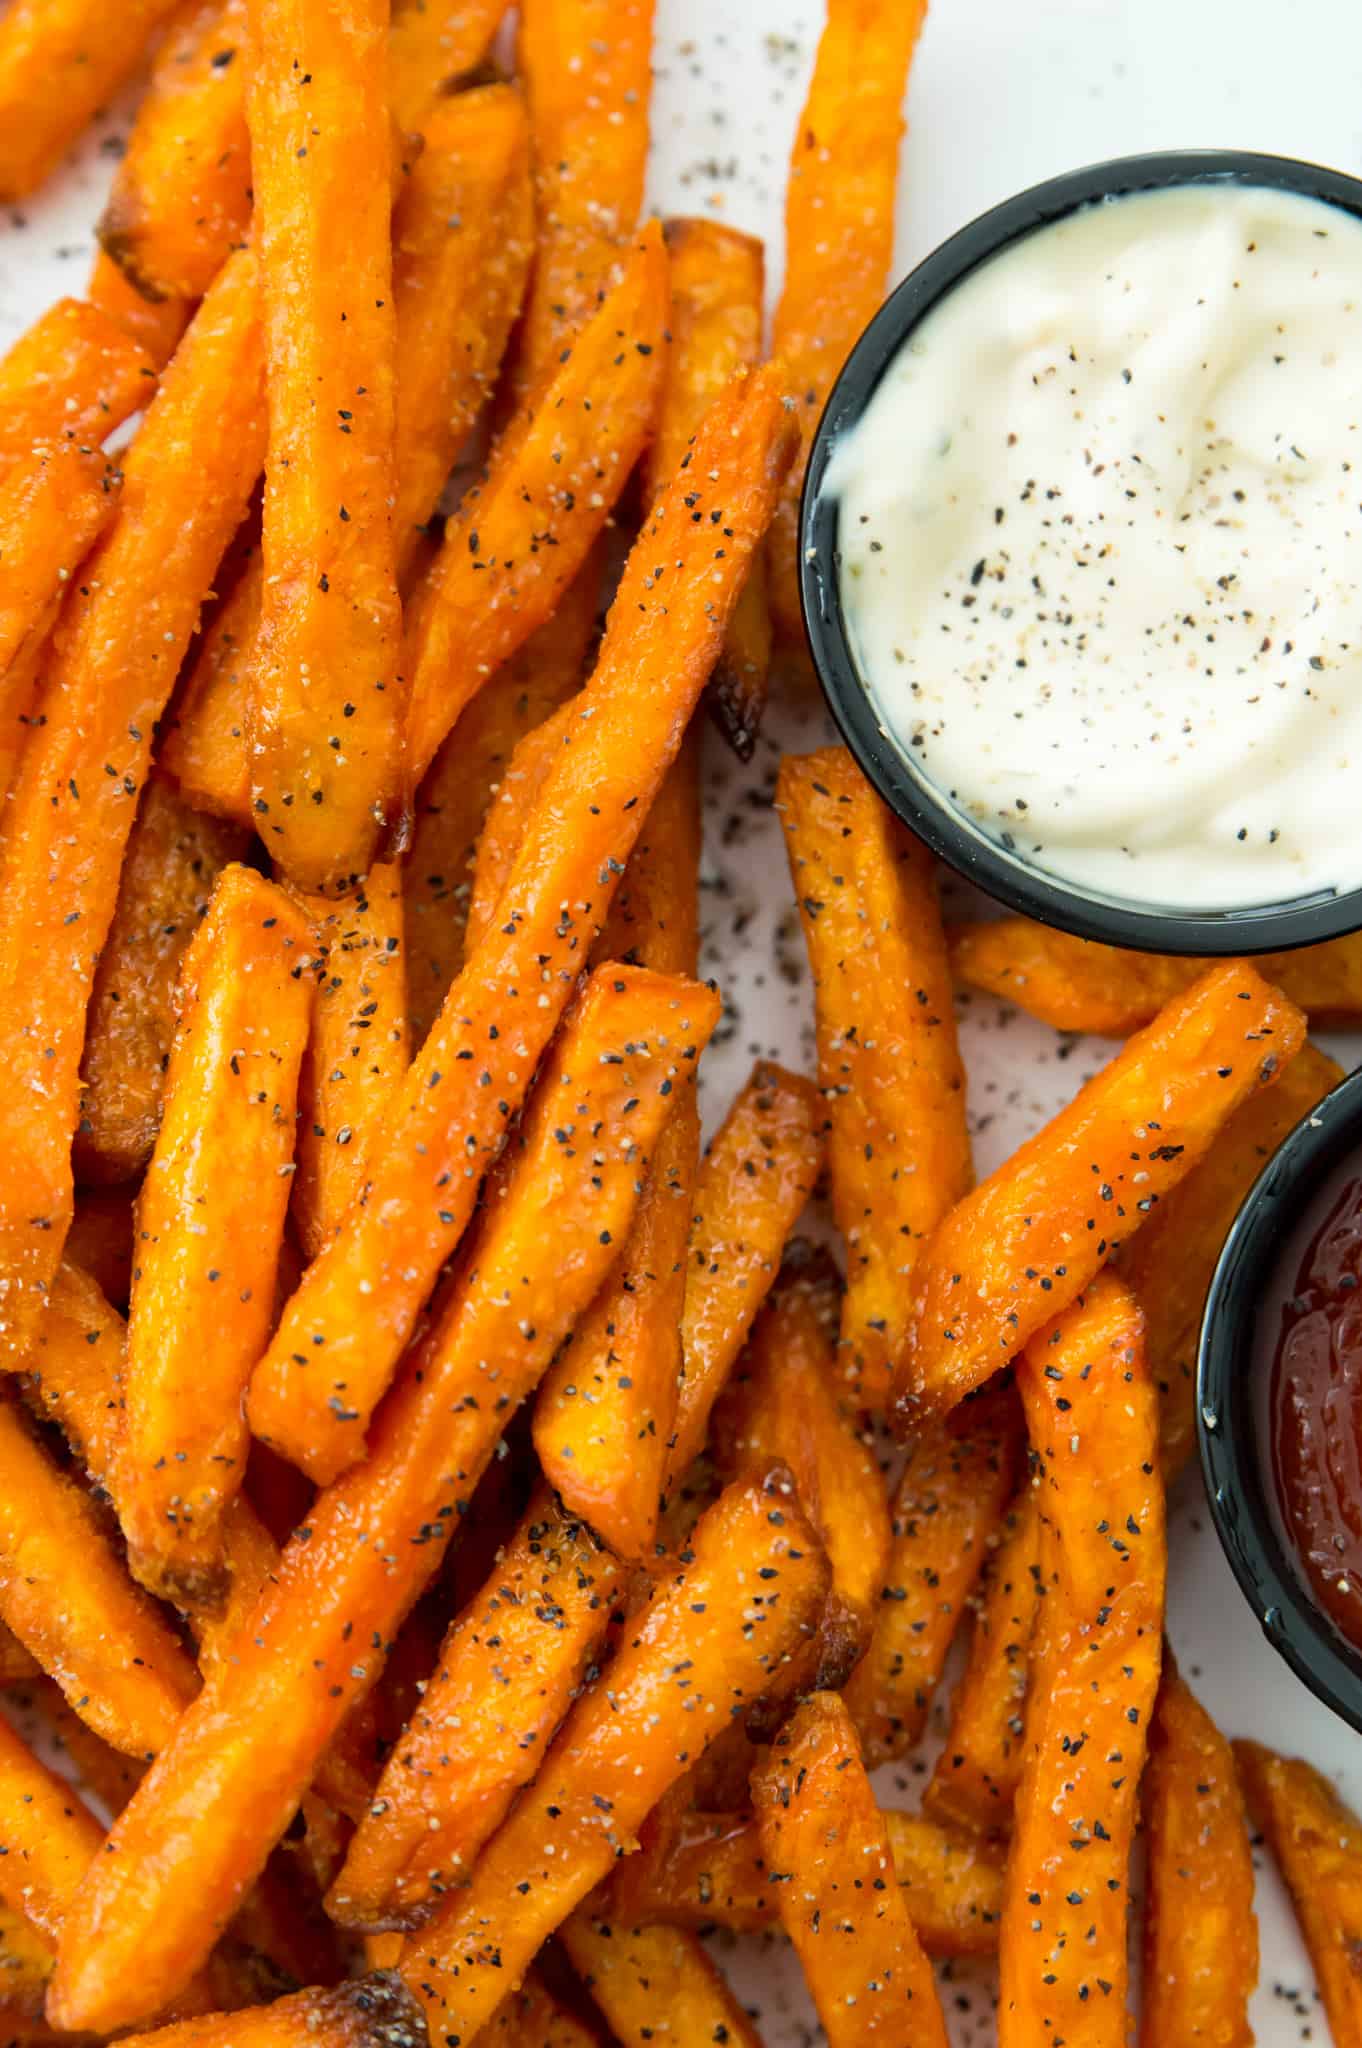 A plate of sweet potato fries cooked in an air fryer with a side of ketchup and aioli